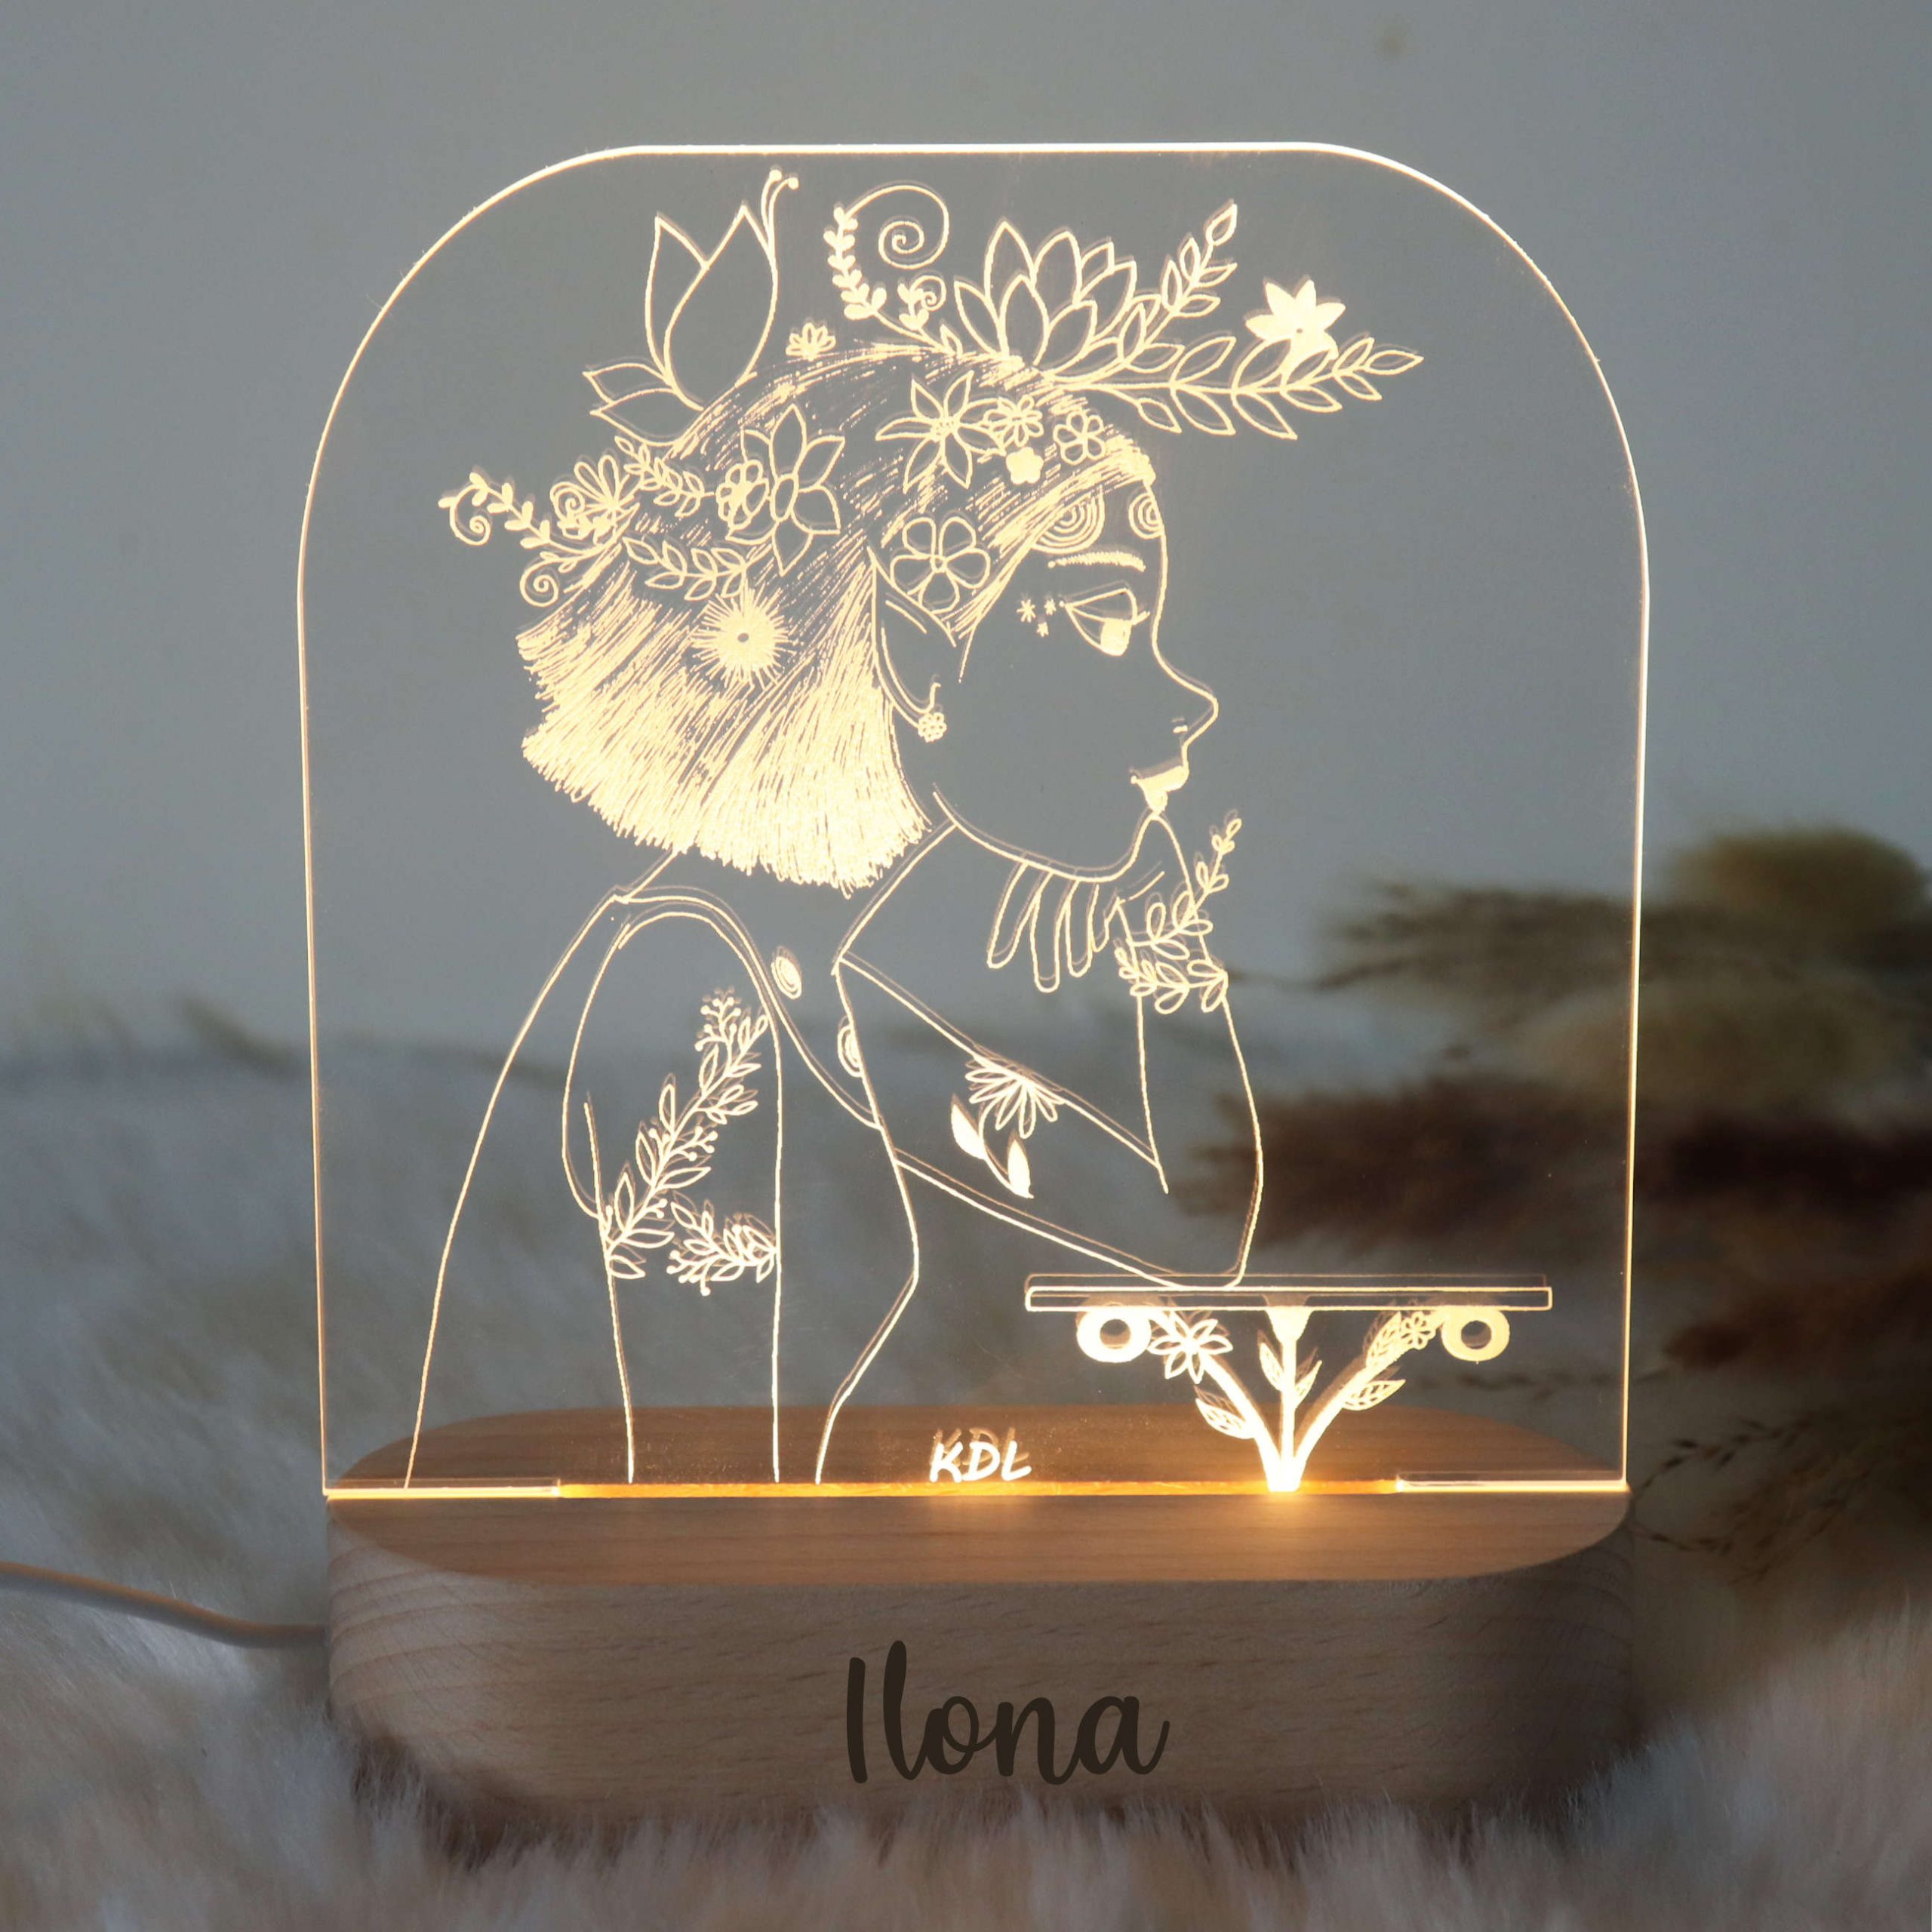 https://elycecreation.com/wp-content/uploads/2023/10/veilleuse-lumiere-lampe-personnalisee-prenom-nom-famille-enfant-k-des-ailes-personalized-nightlight-for-child-with-name-b-scaled.jpg